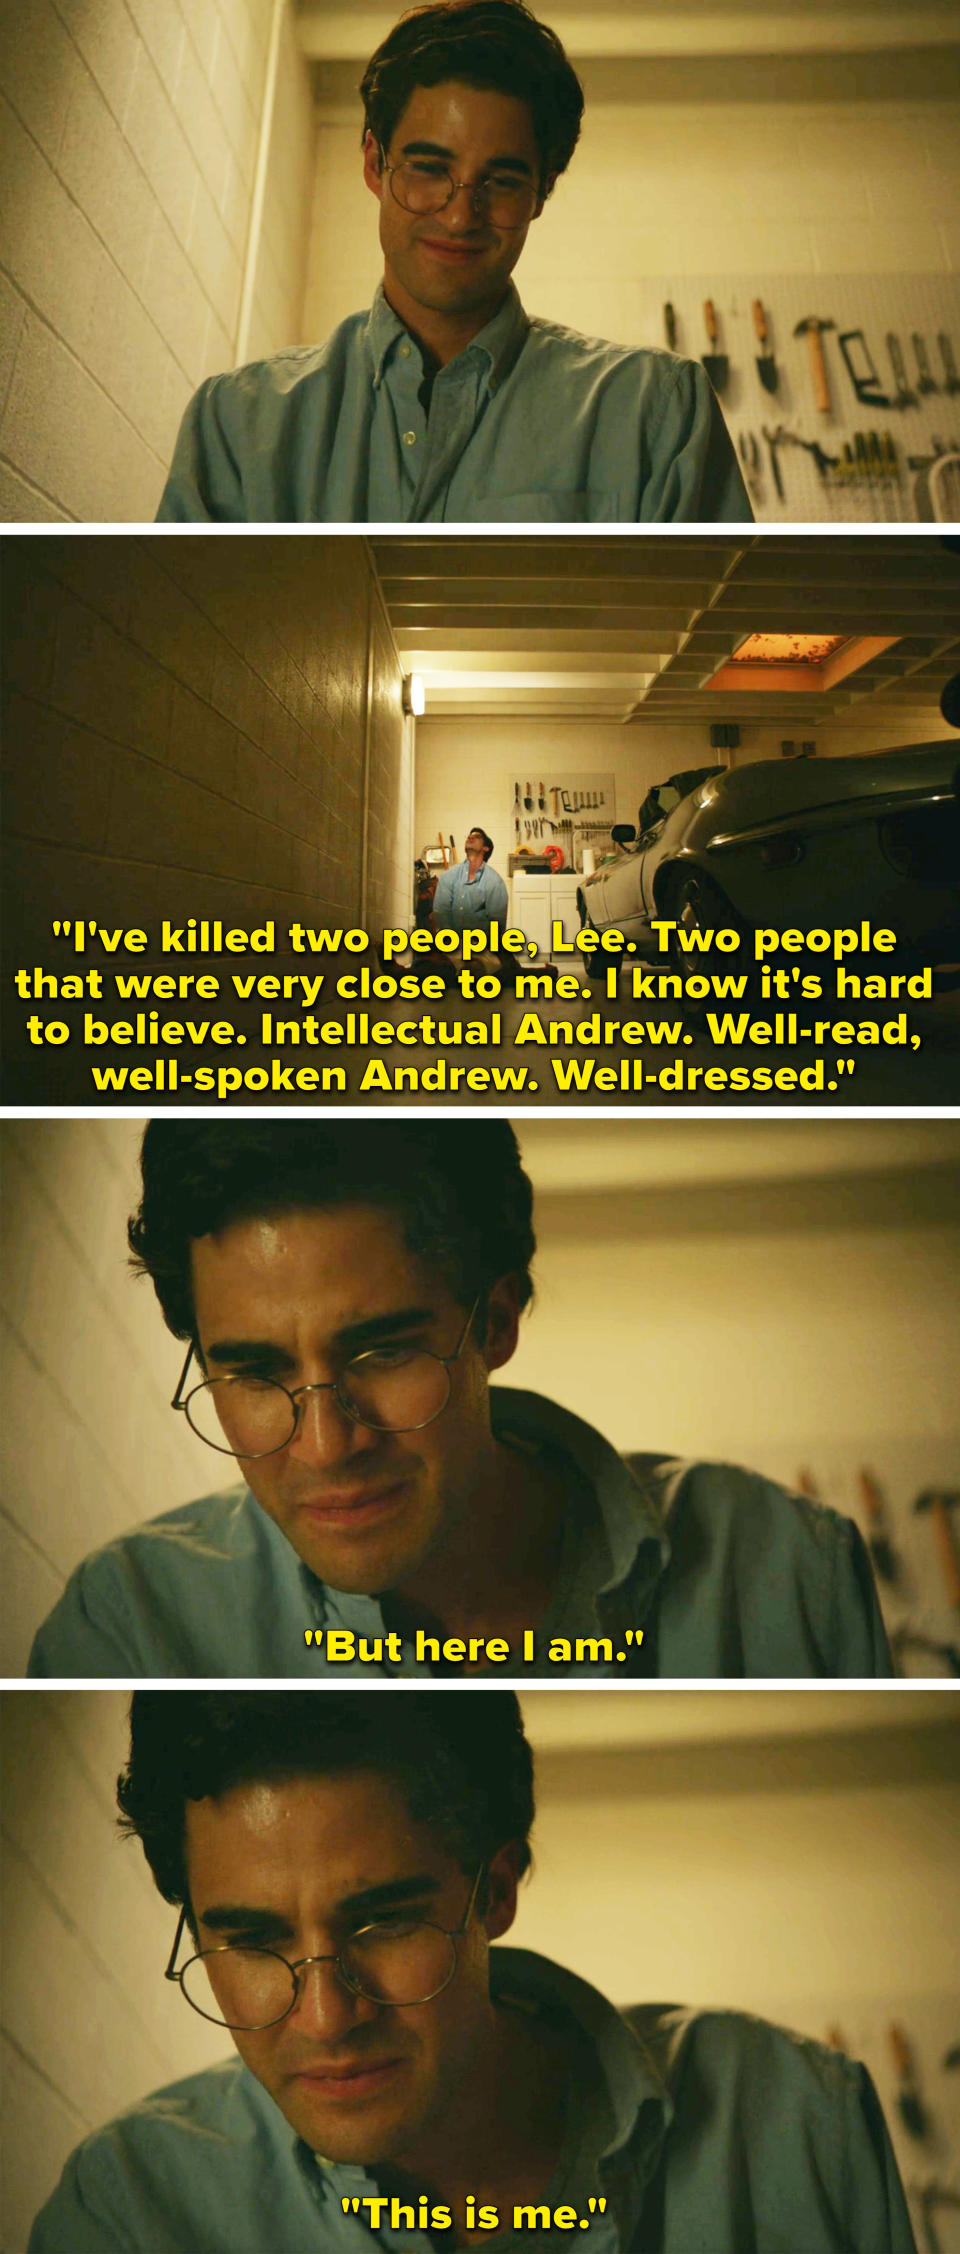 Andrew sitting in a garage saying that he just killed two people even though it's hard to believe